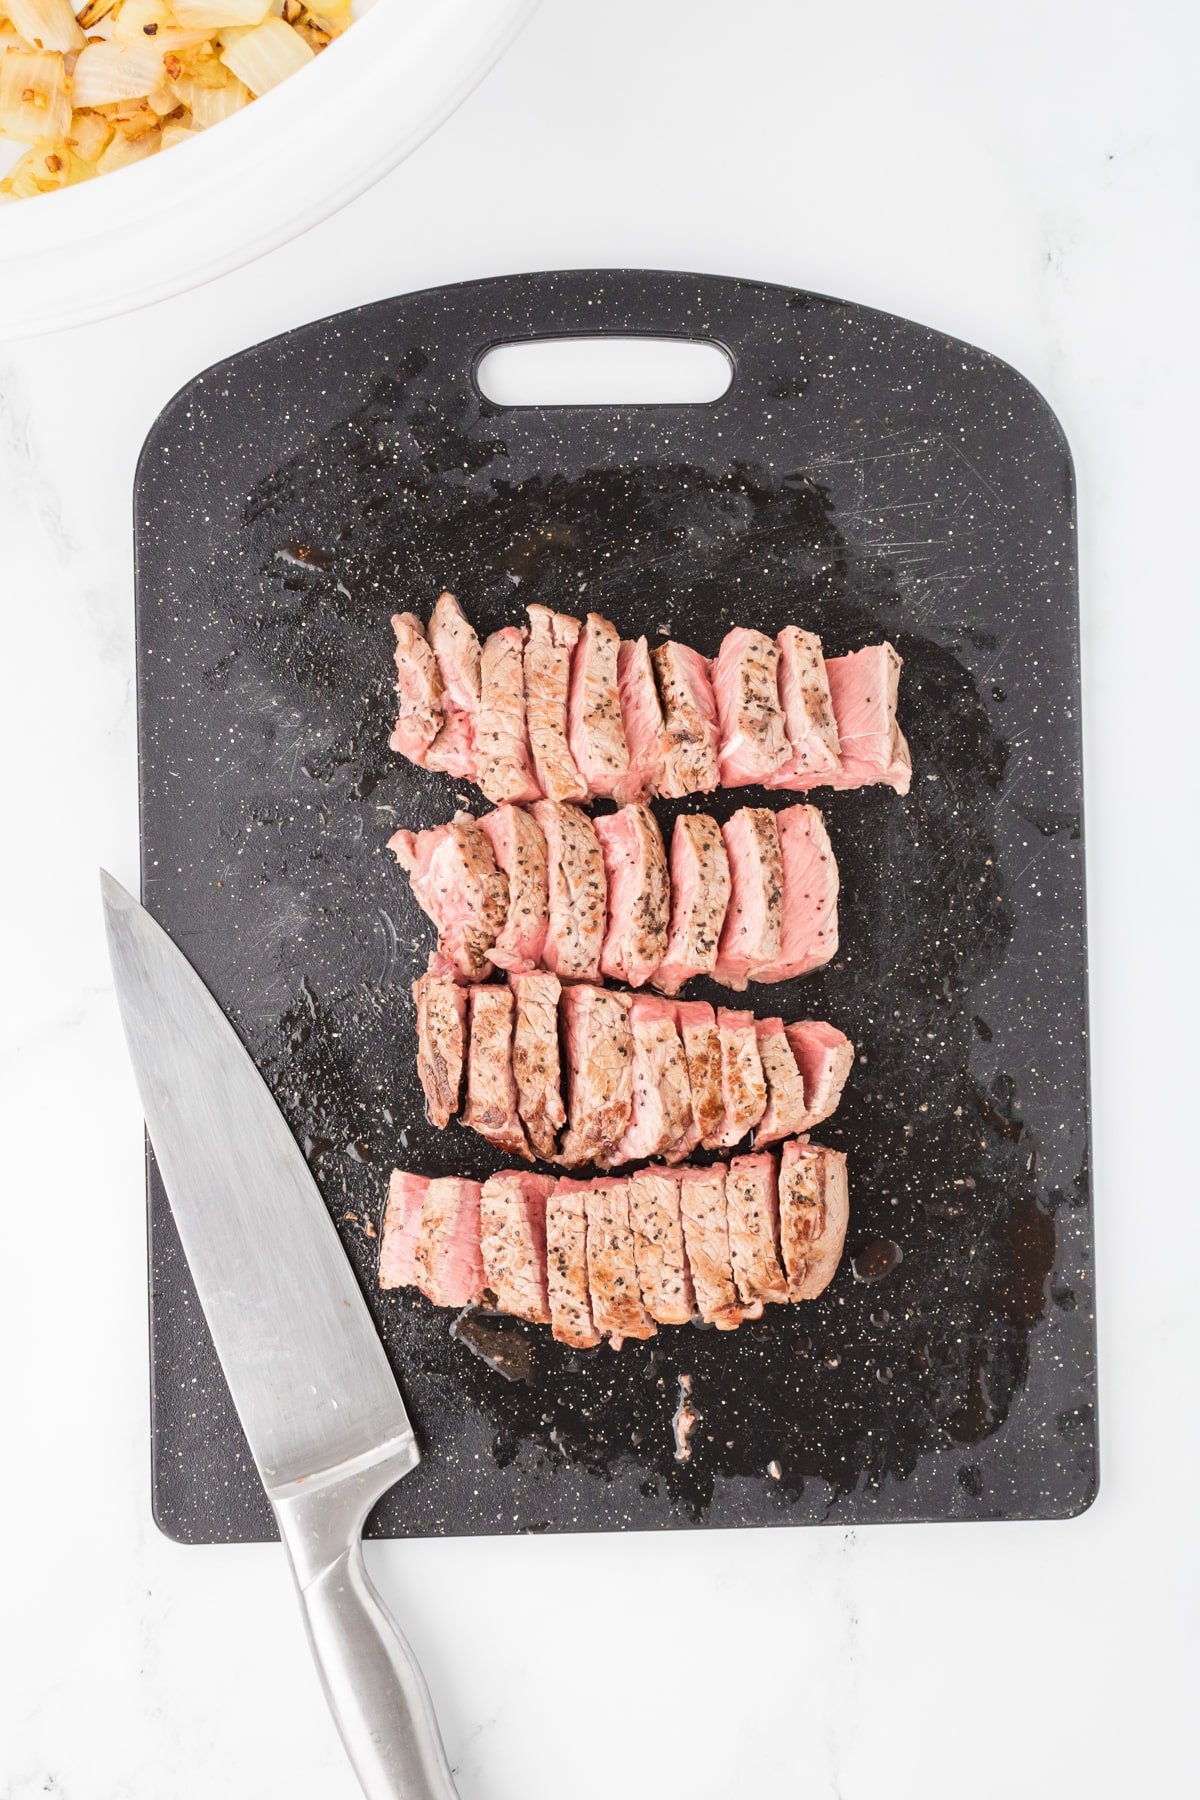 A cutting board with beef cut into strips.